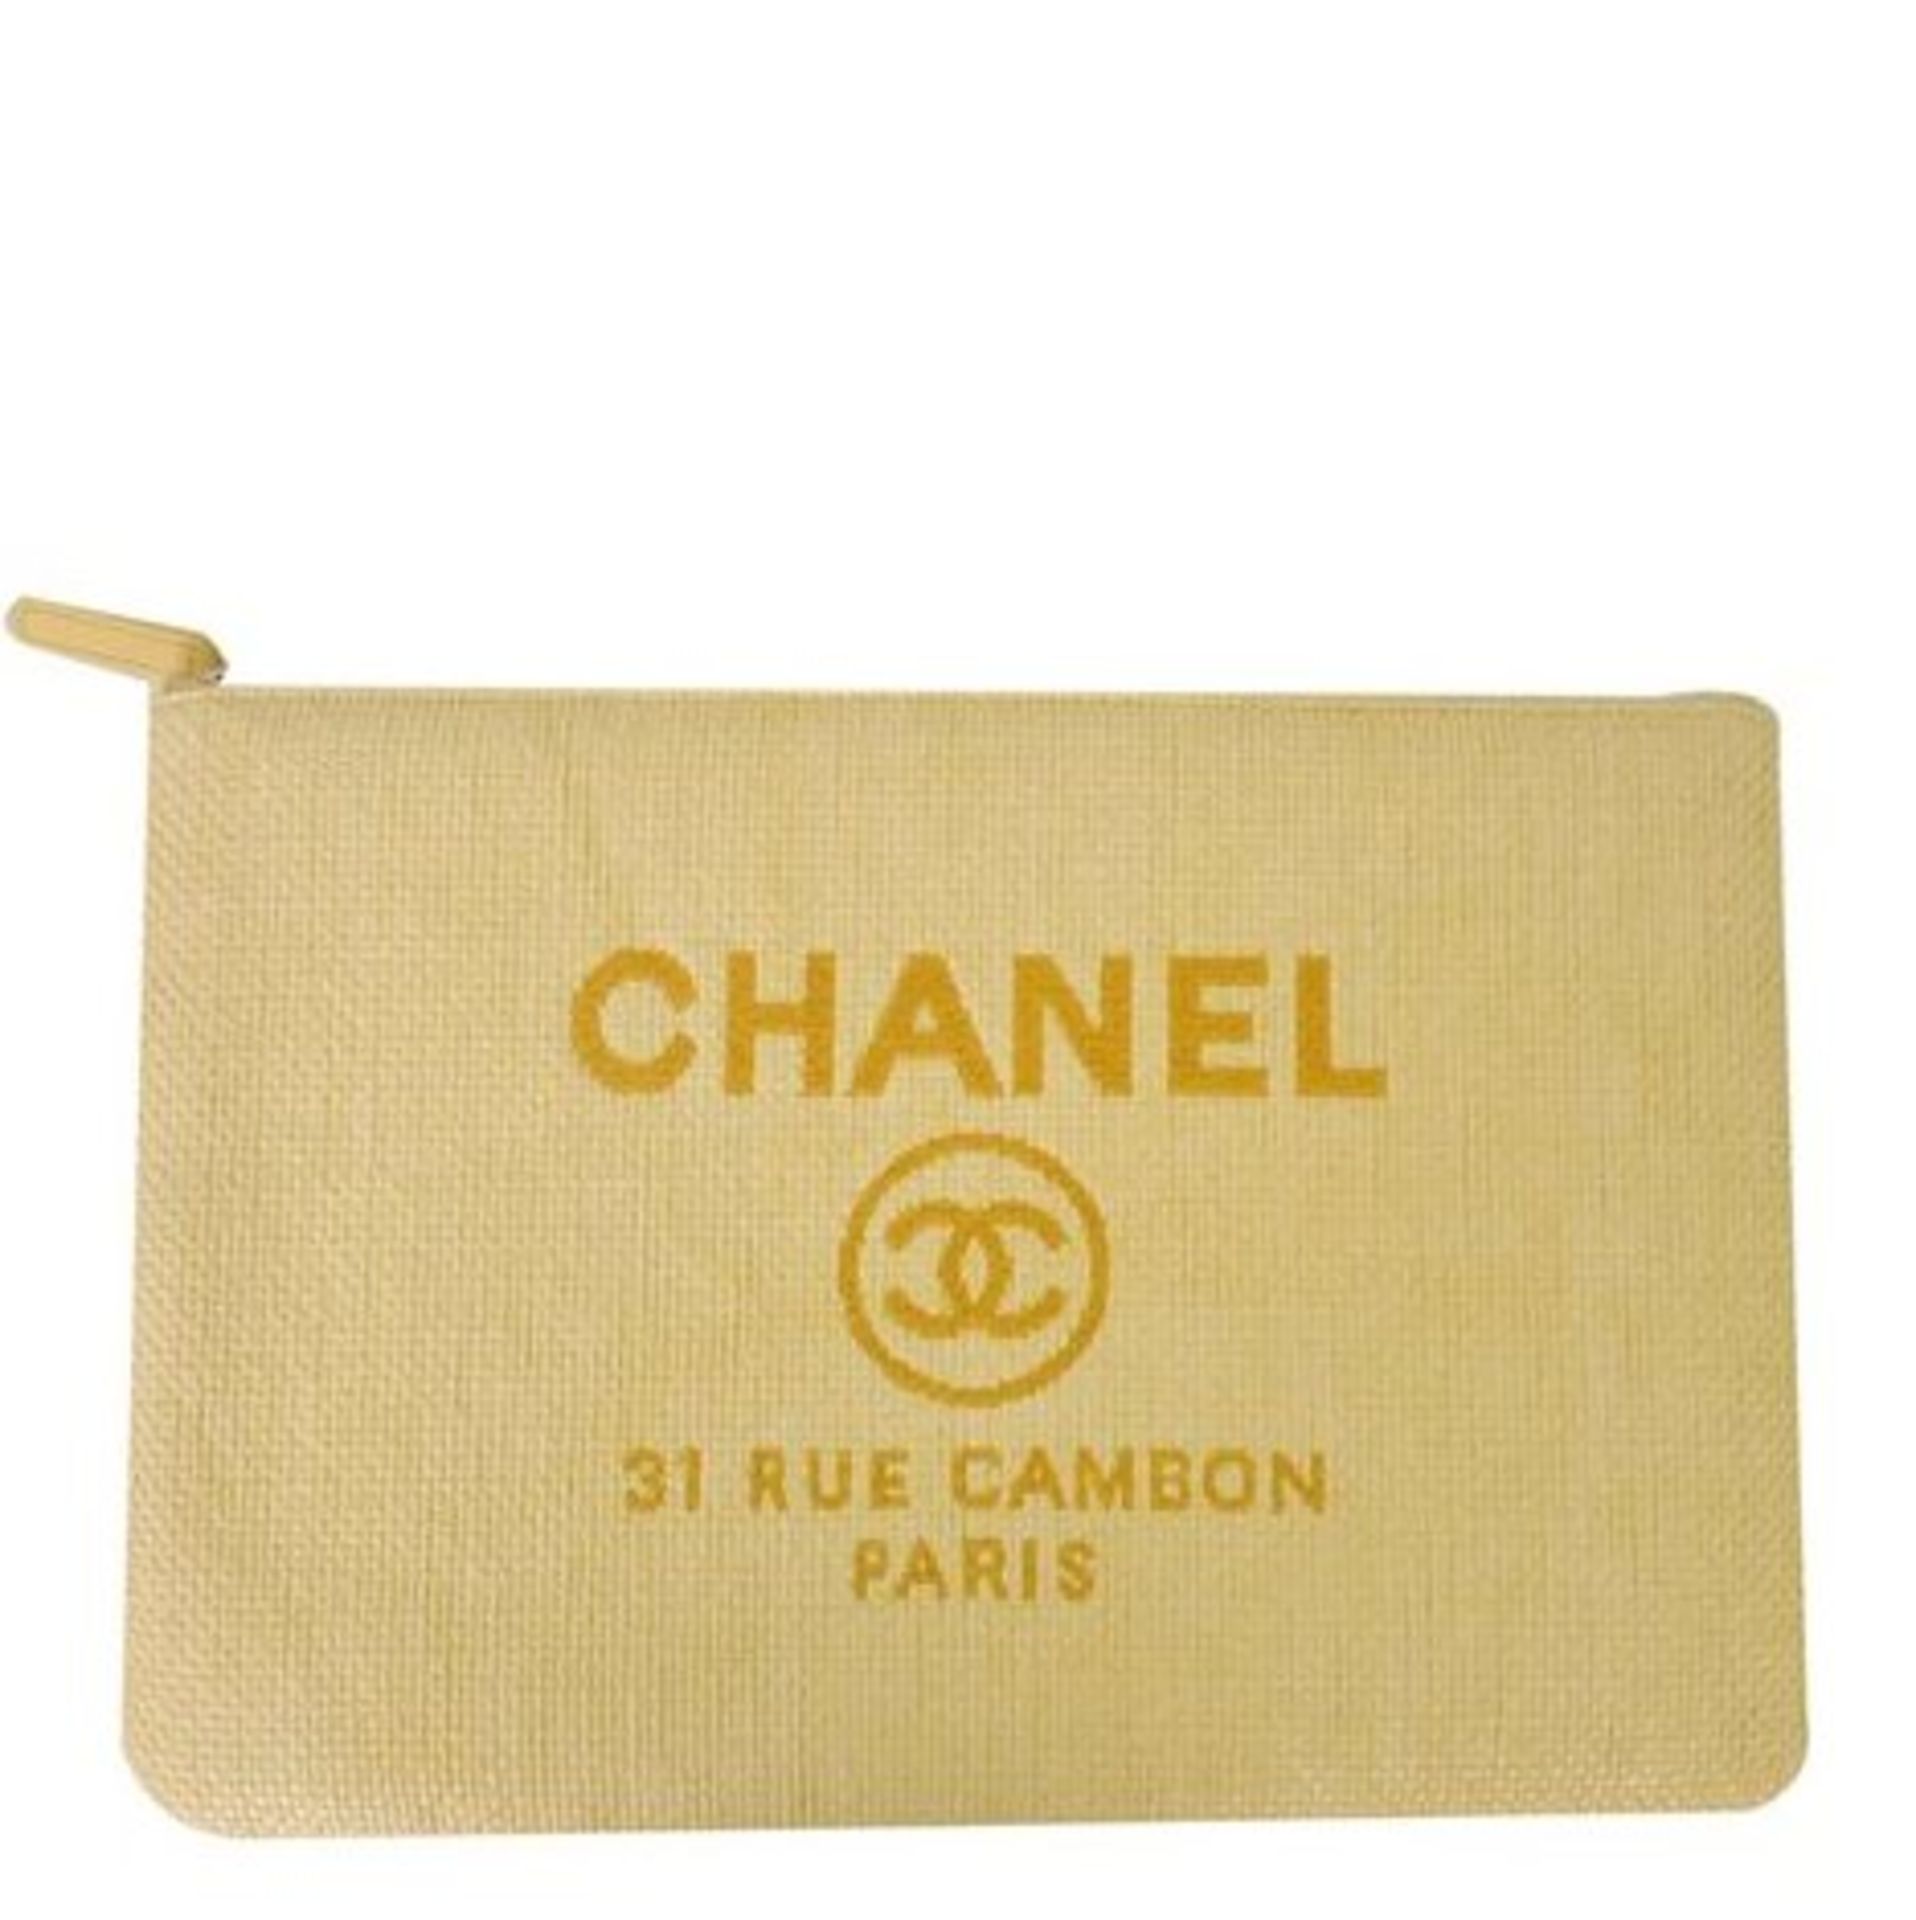 Chanel - Deauville Canvas Clutch